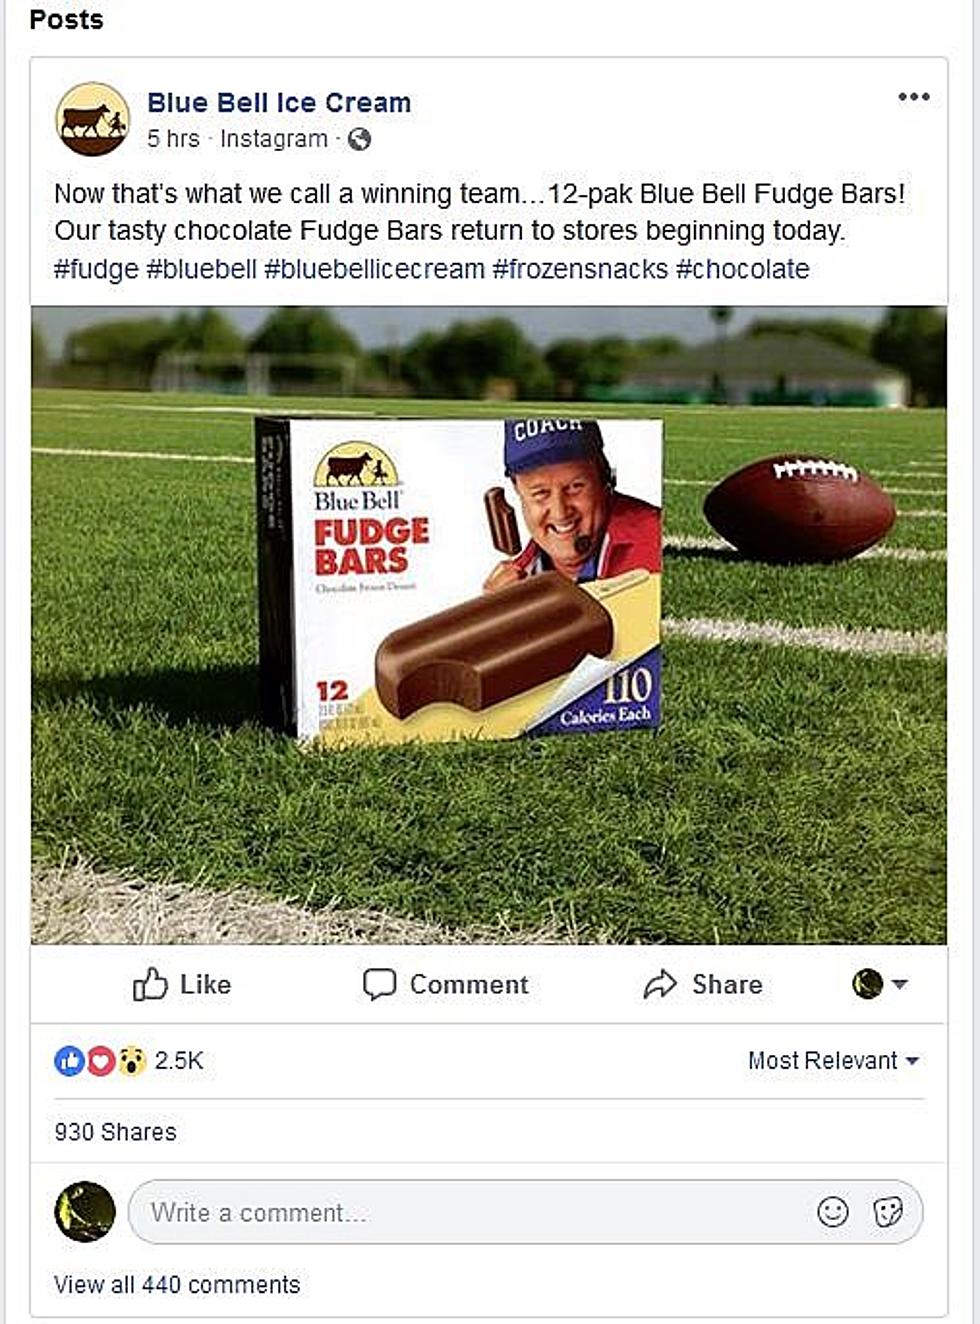 Blue Bell Fudge Bars Are Back In Stores!